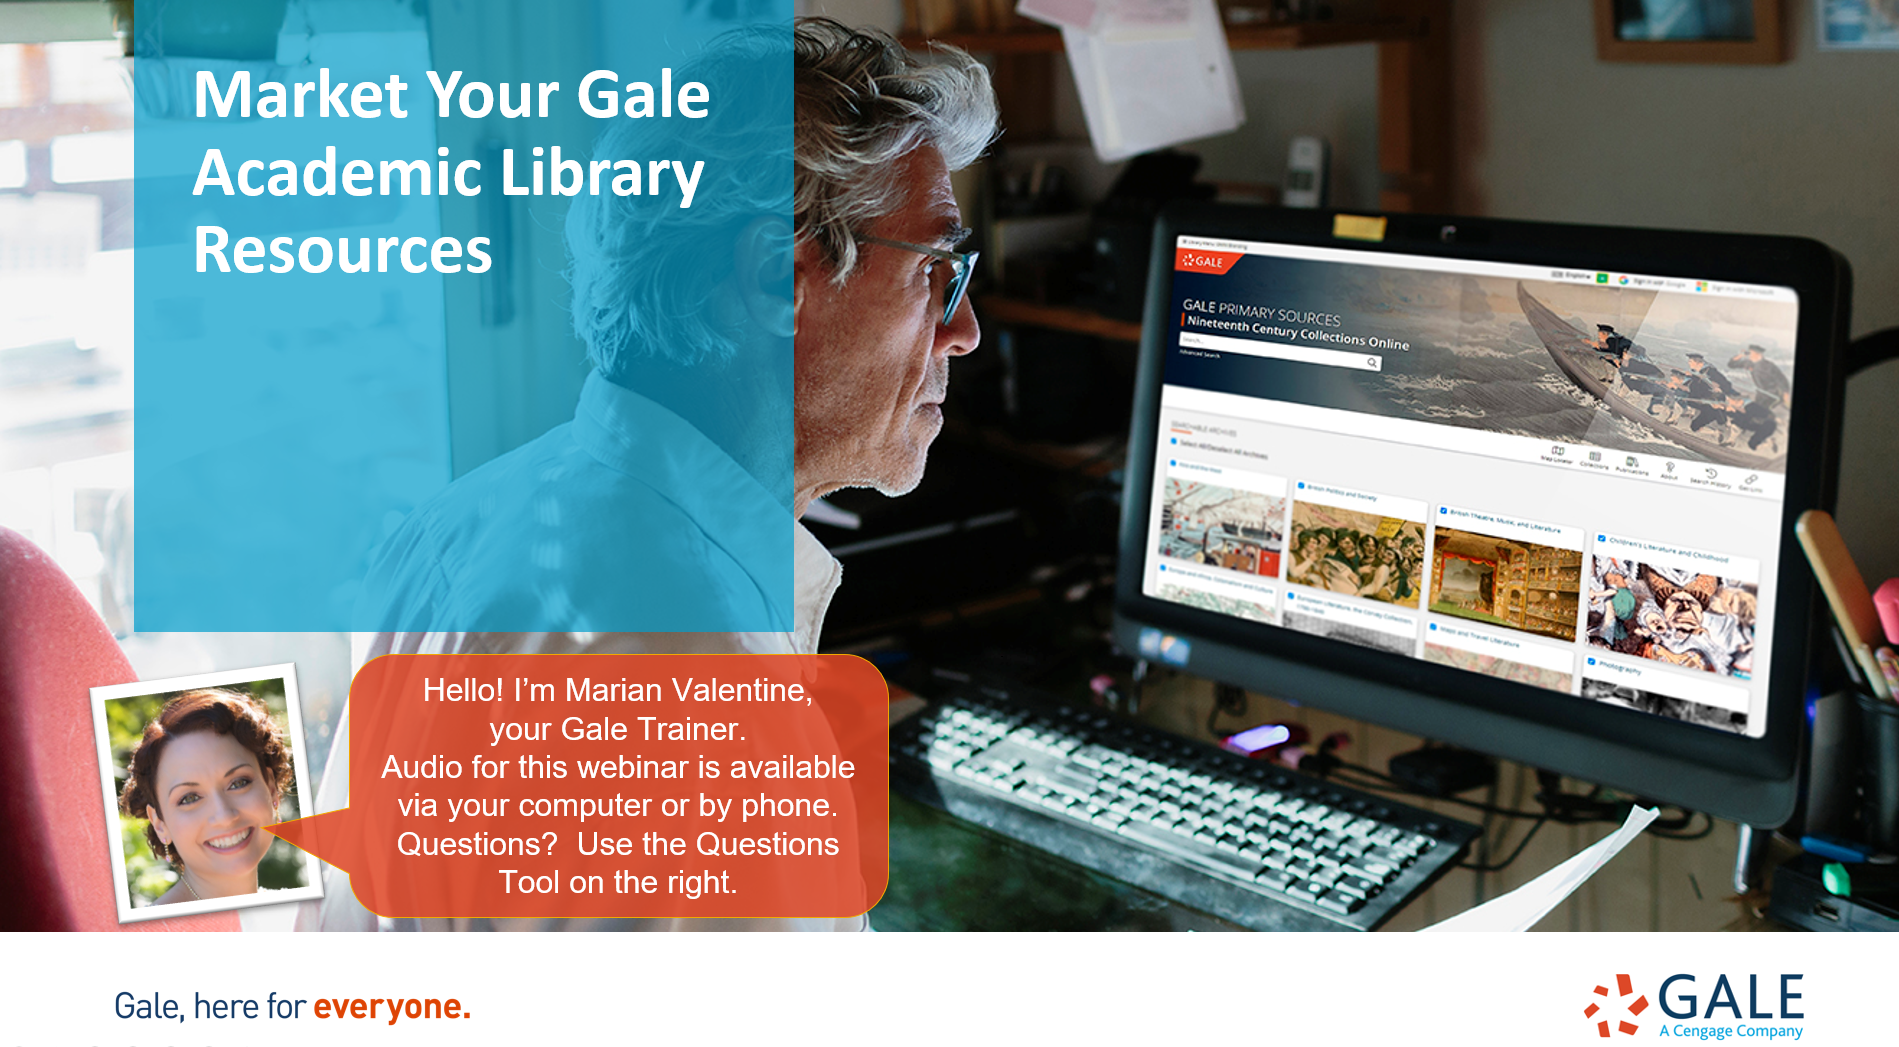 Market Your Gale Academic Library Resources